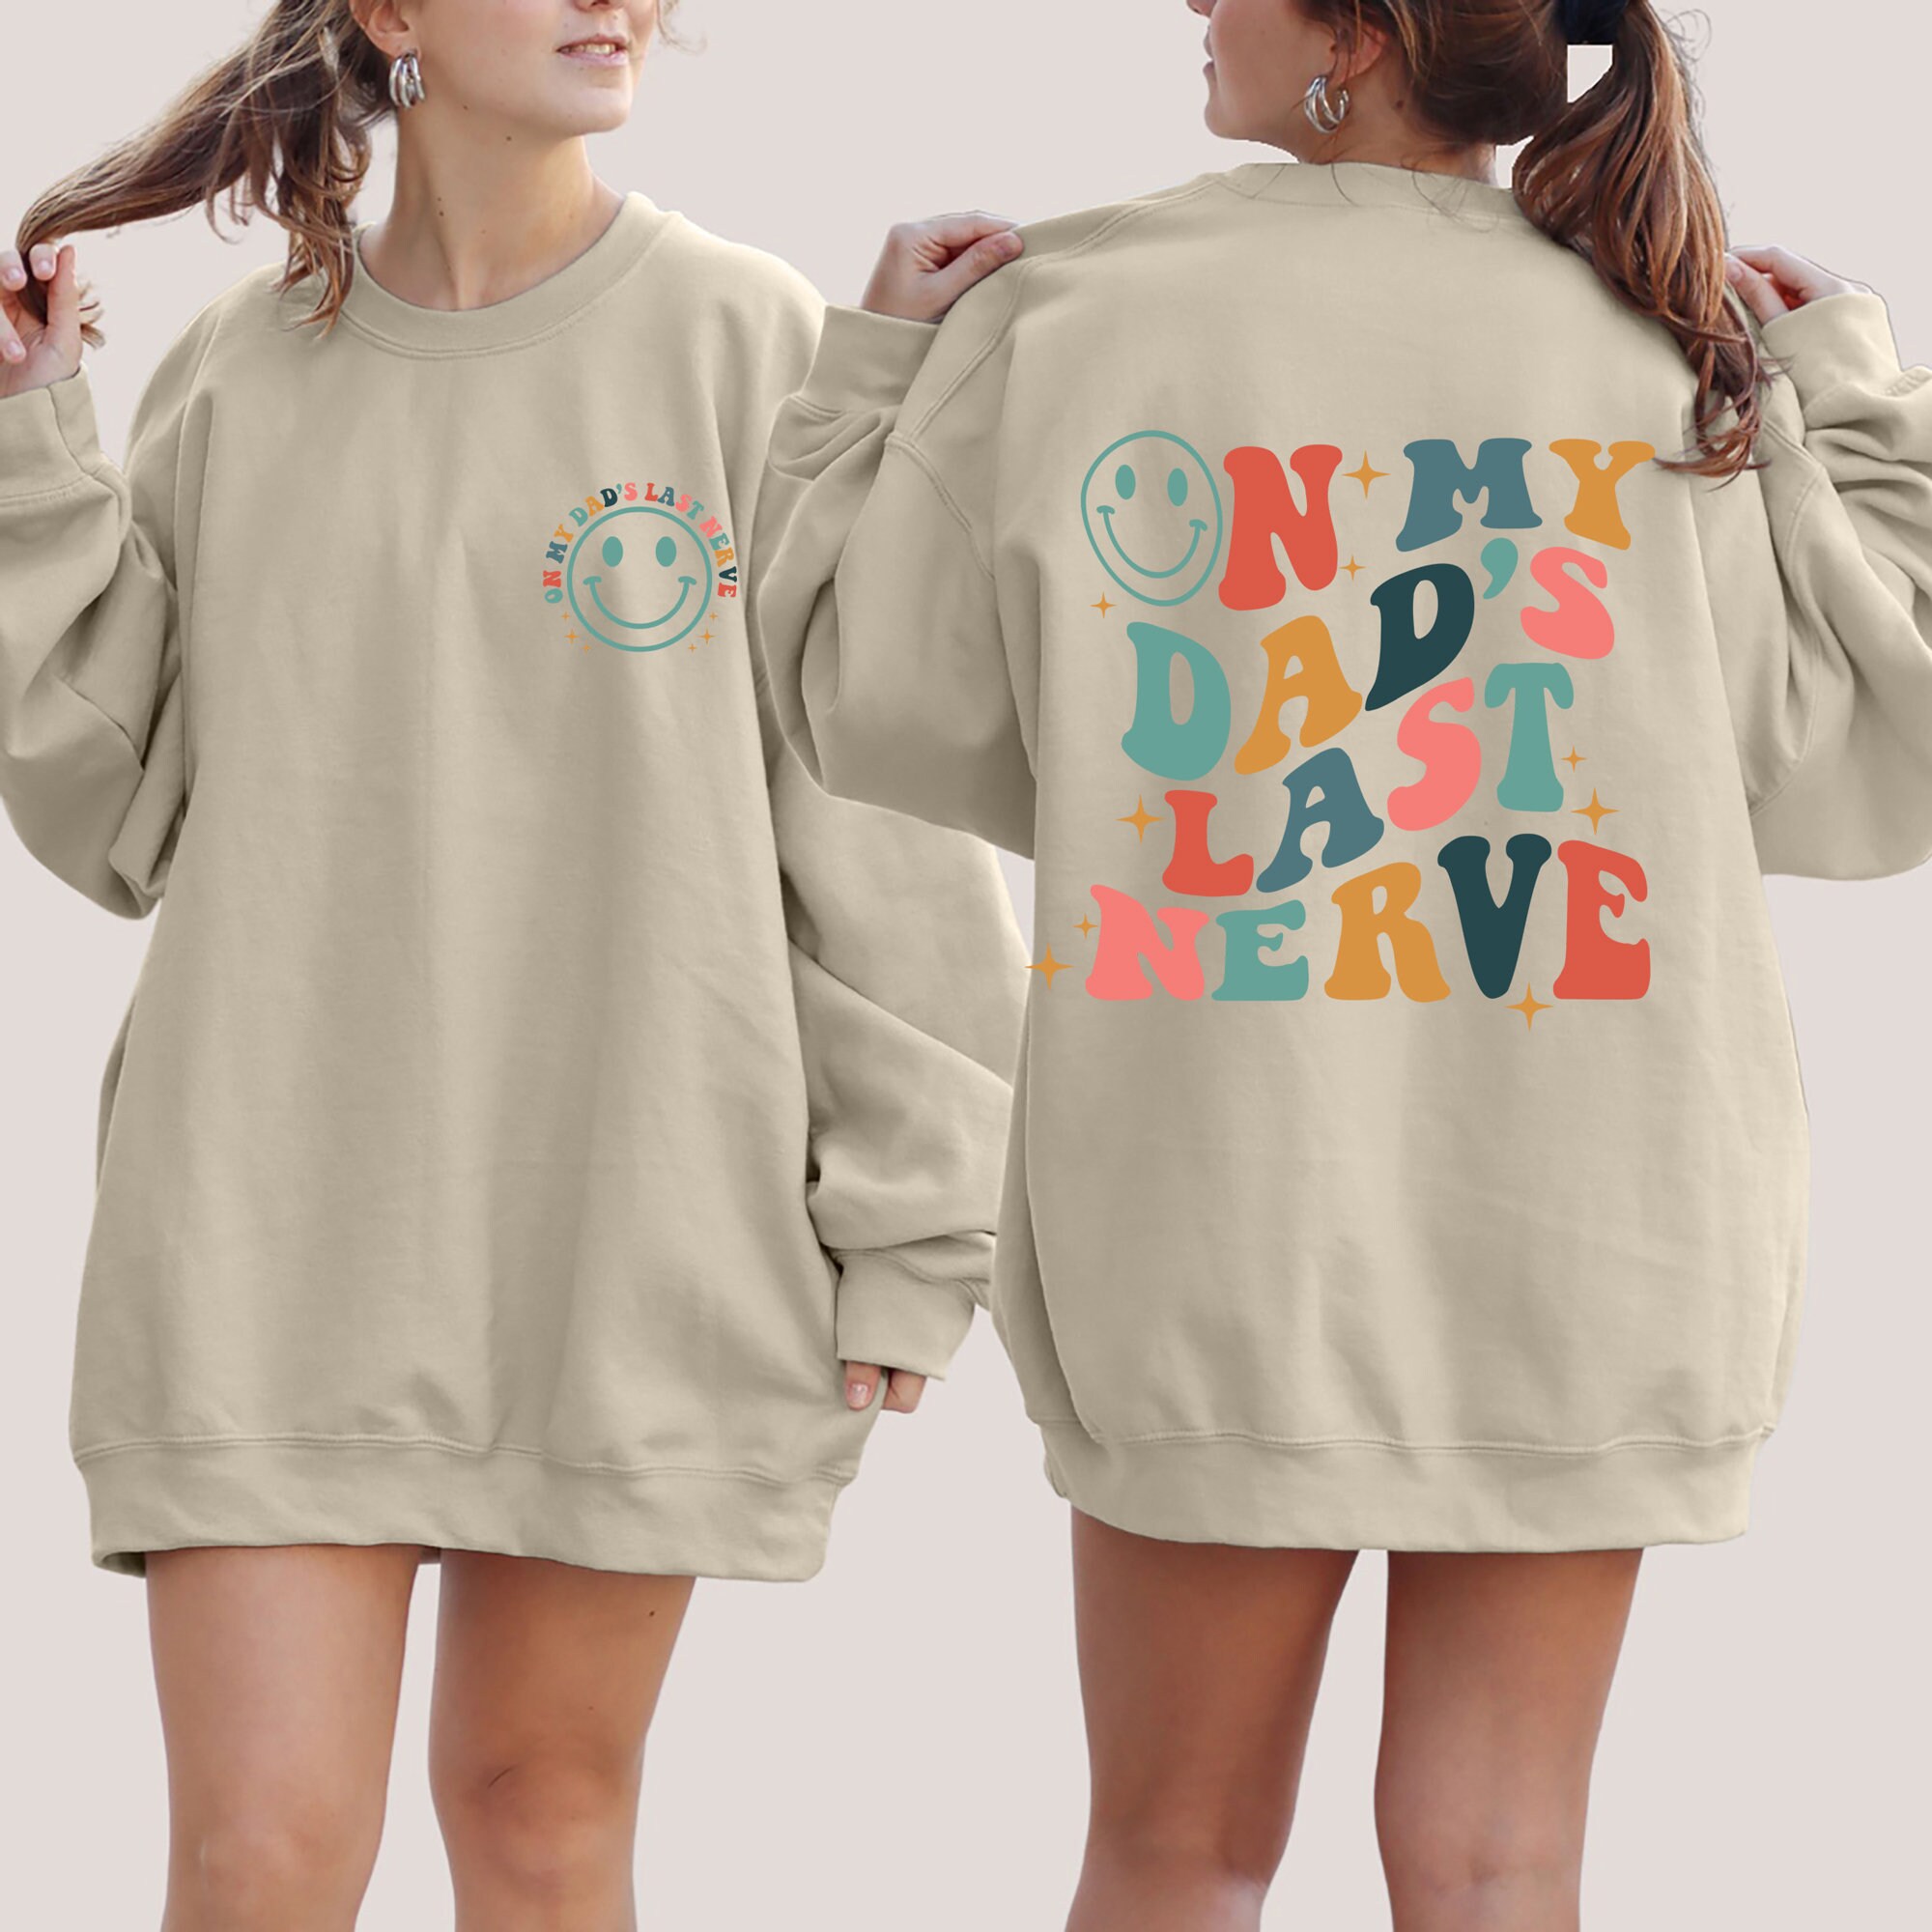 Discover On My Dad's Last Nerve Double Sided Sweatshirts